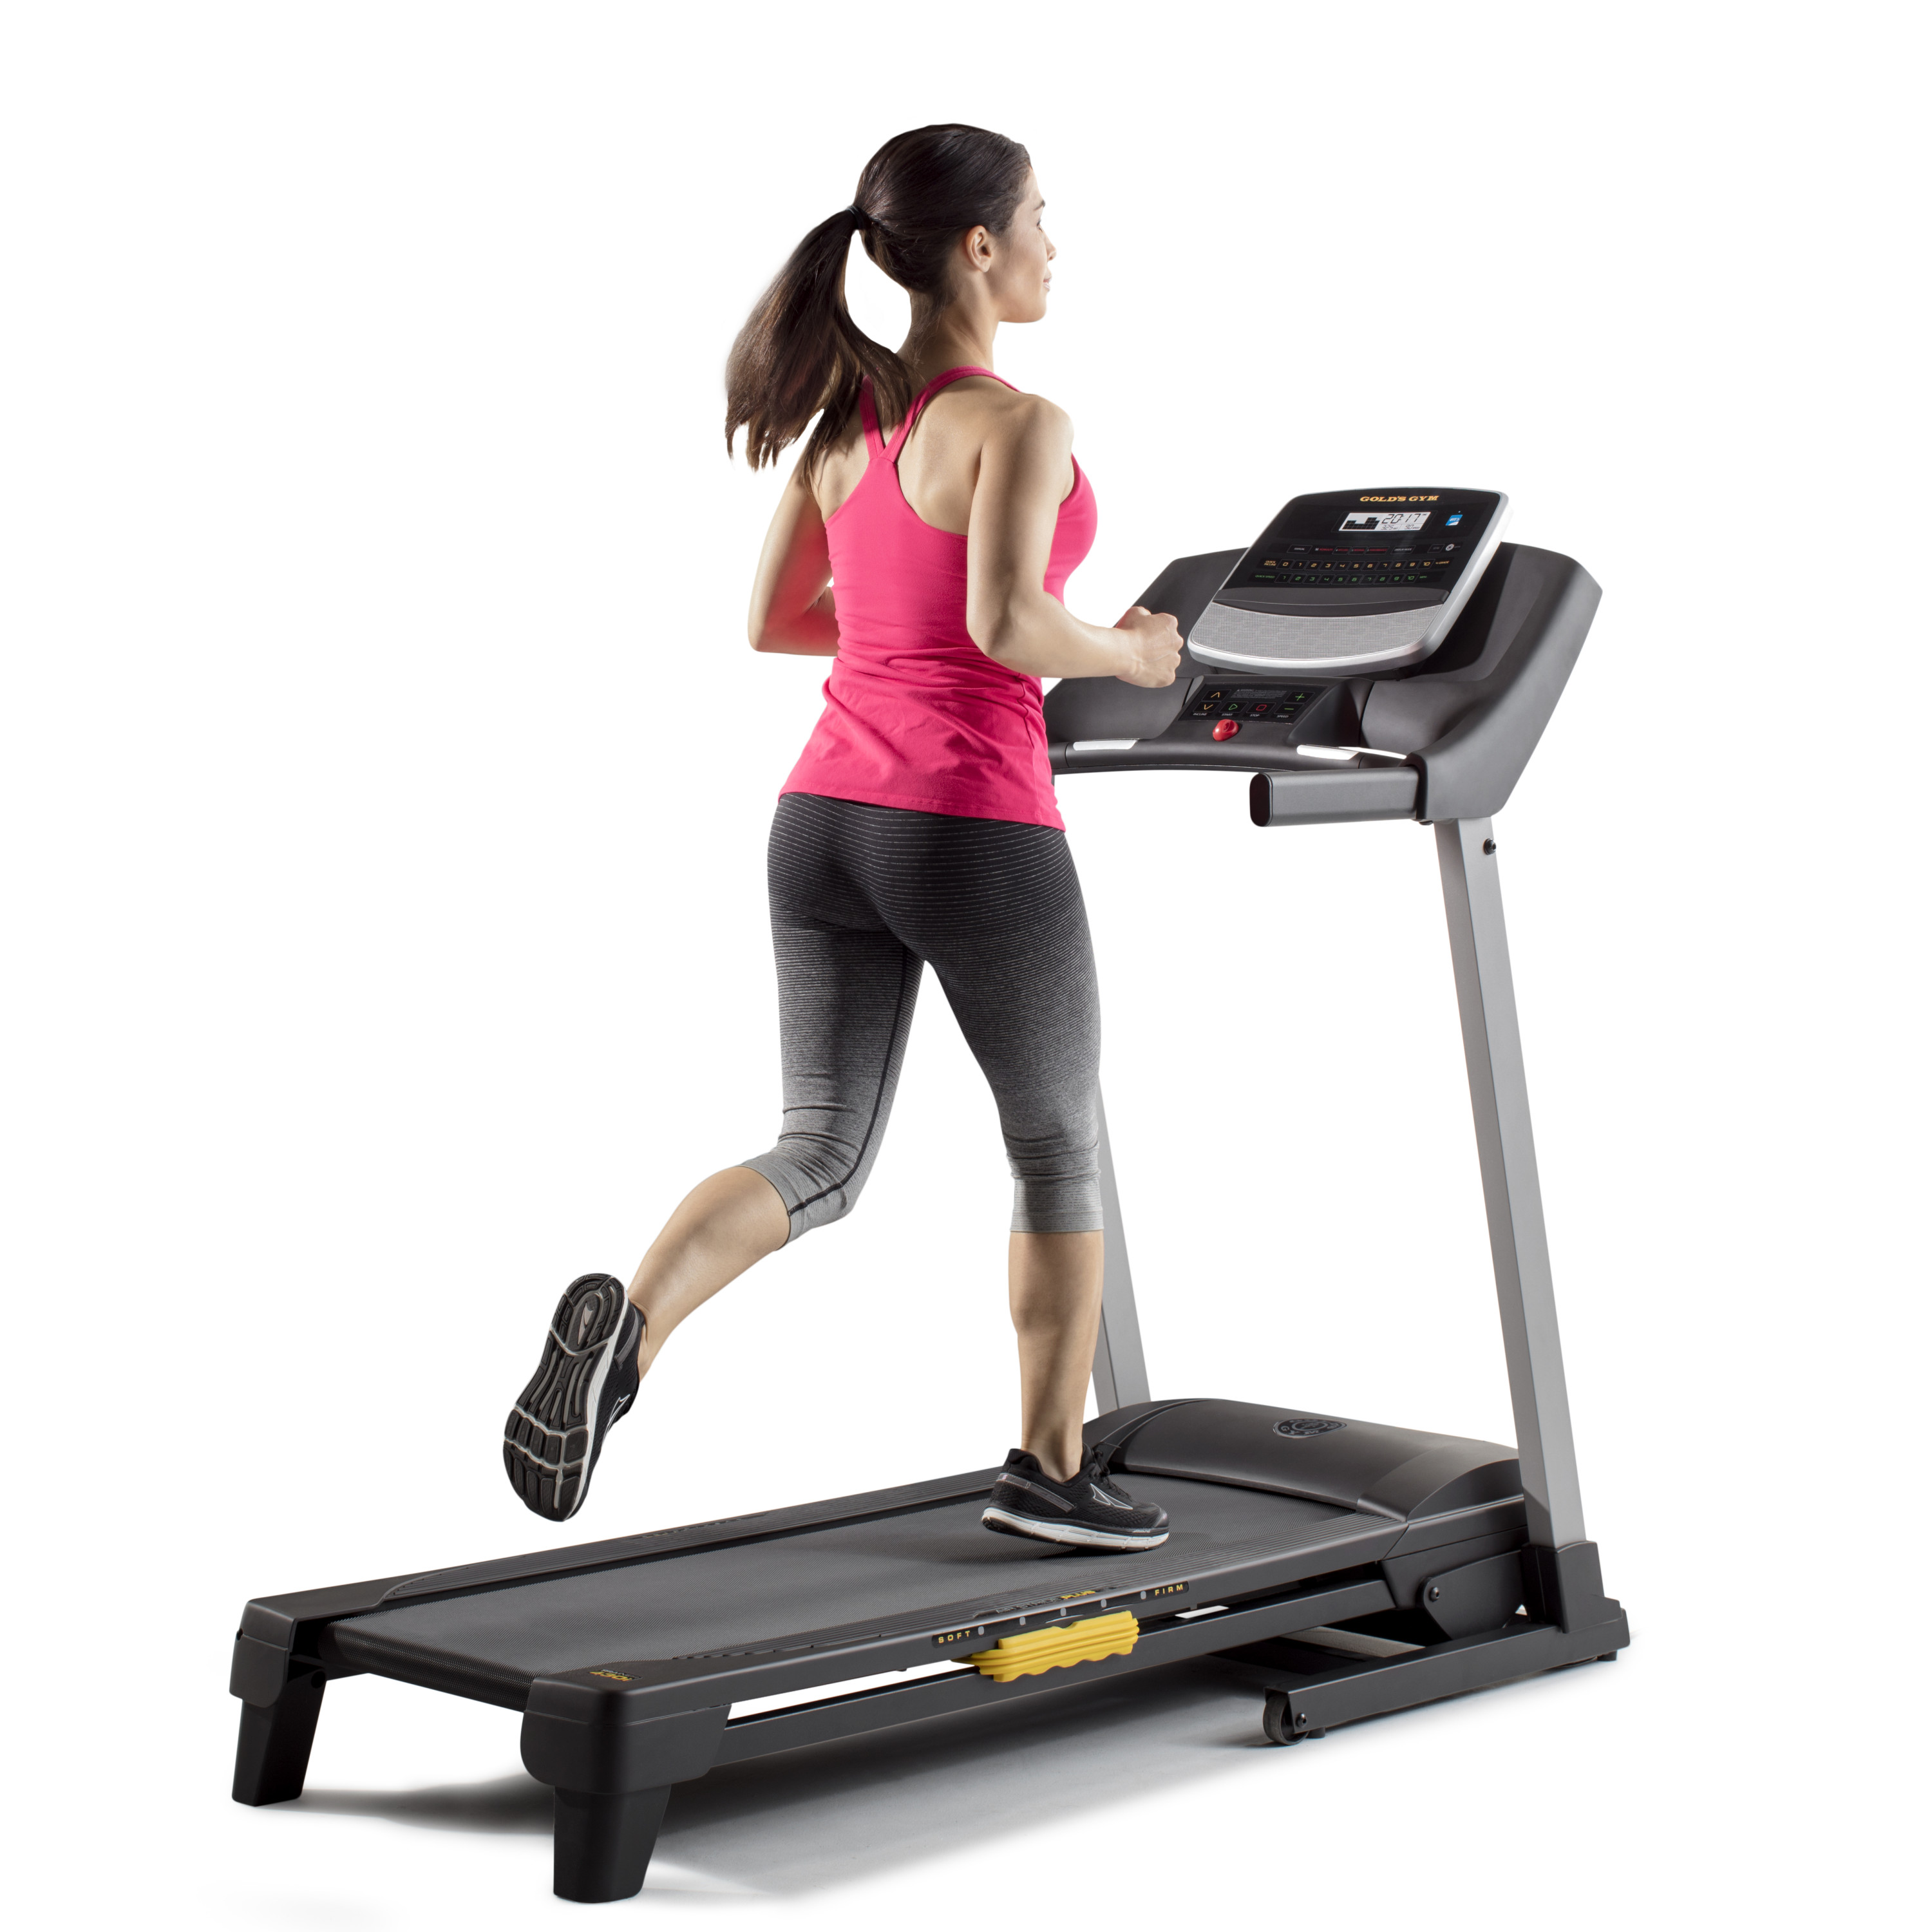 ProForm Trainer 430i Folding Smart Treadmill with 10% Incline, iFit Bluetooth Enabled - image 13 of 18